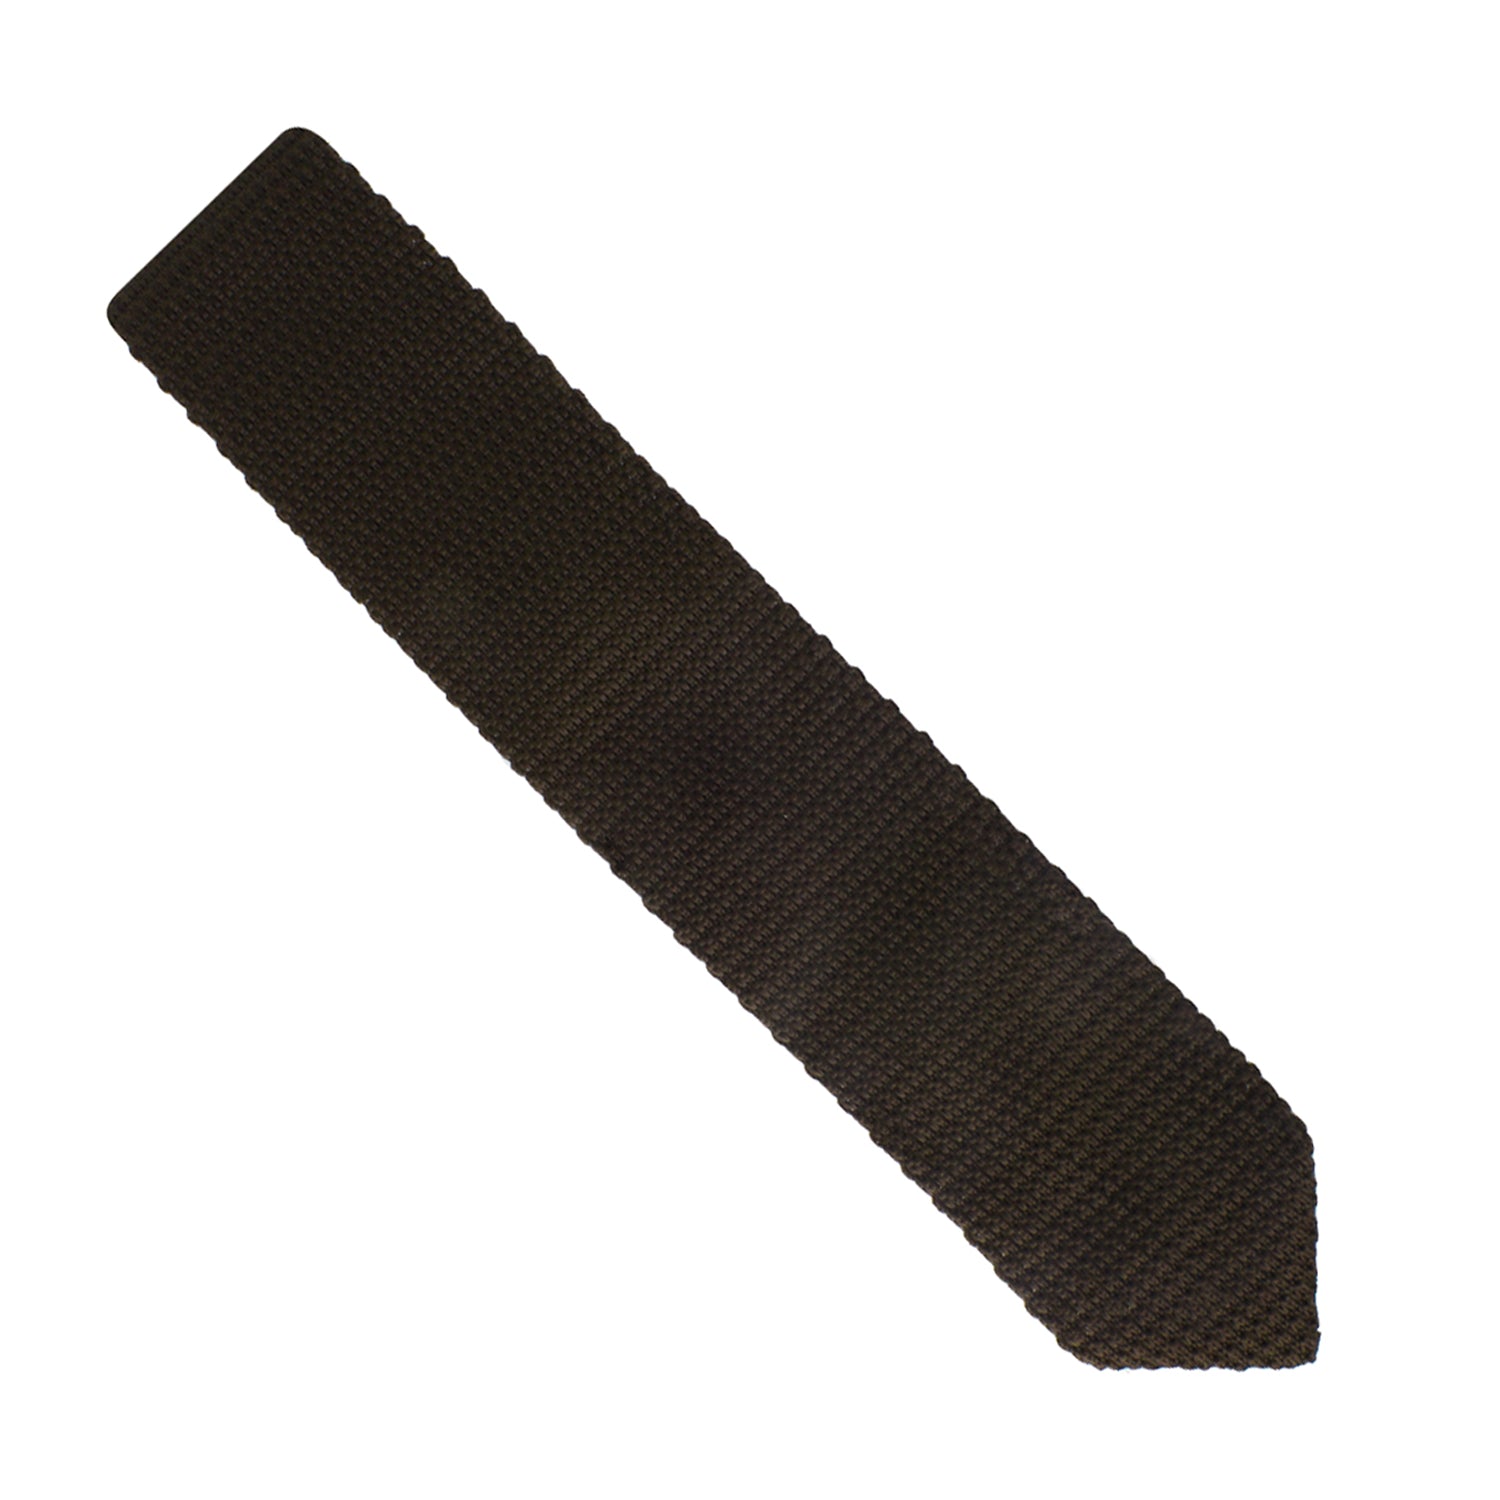 A brown knitted skinny tie on a white background.